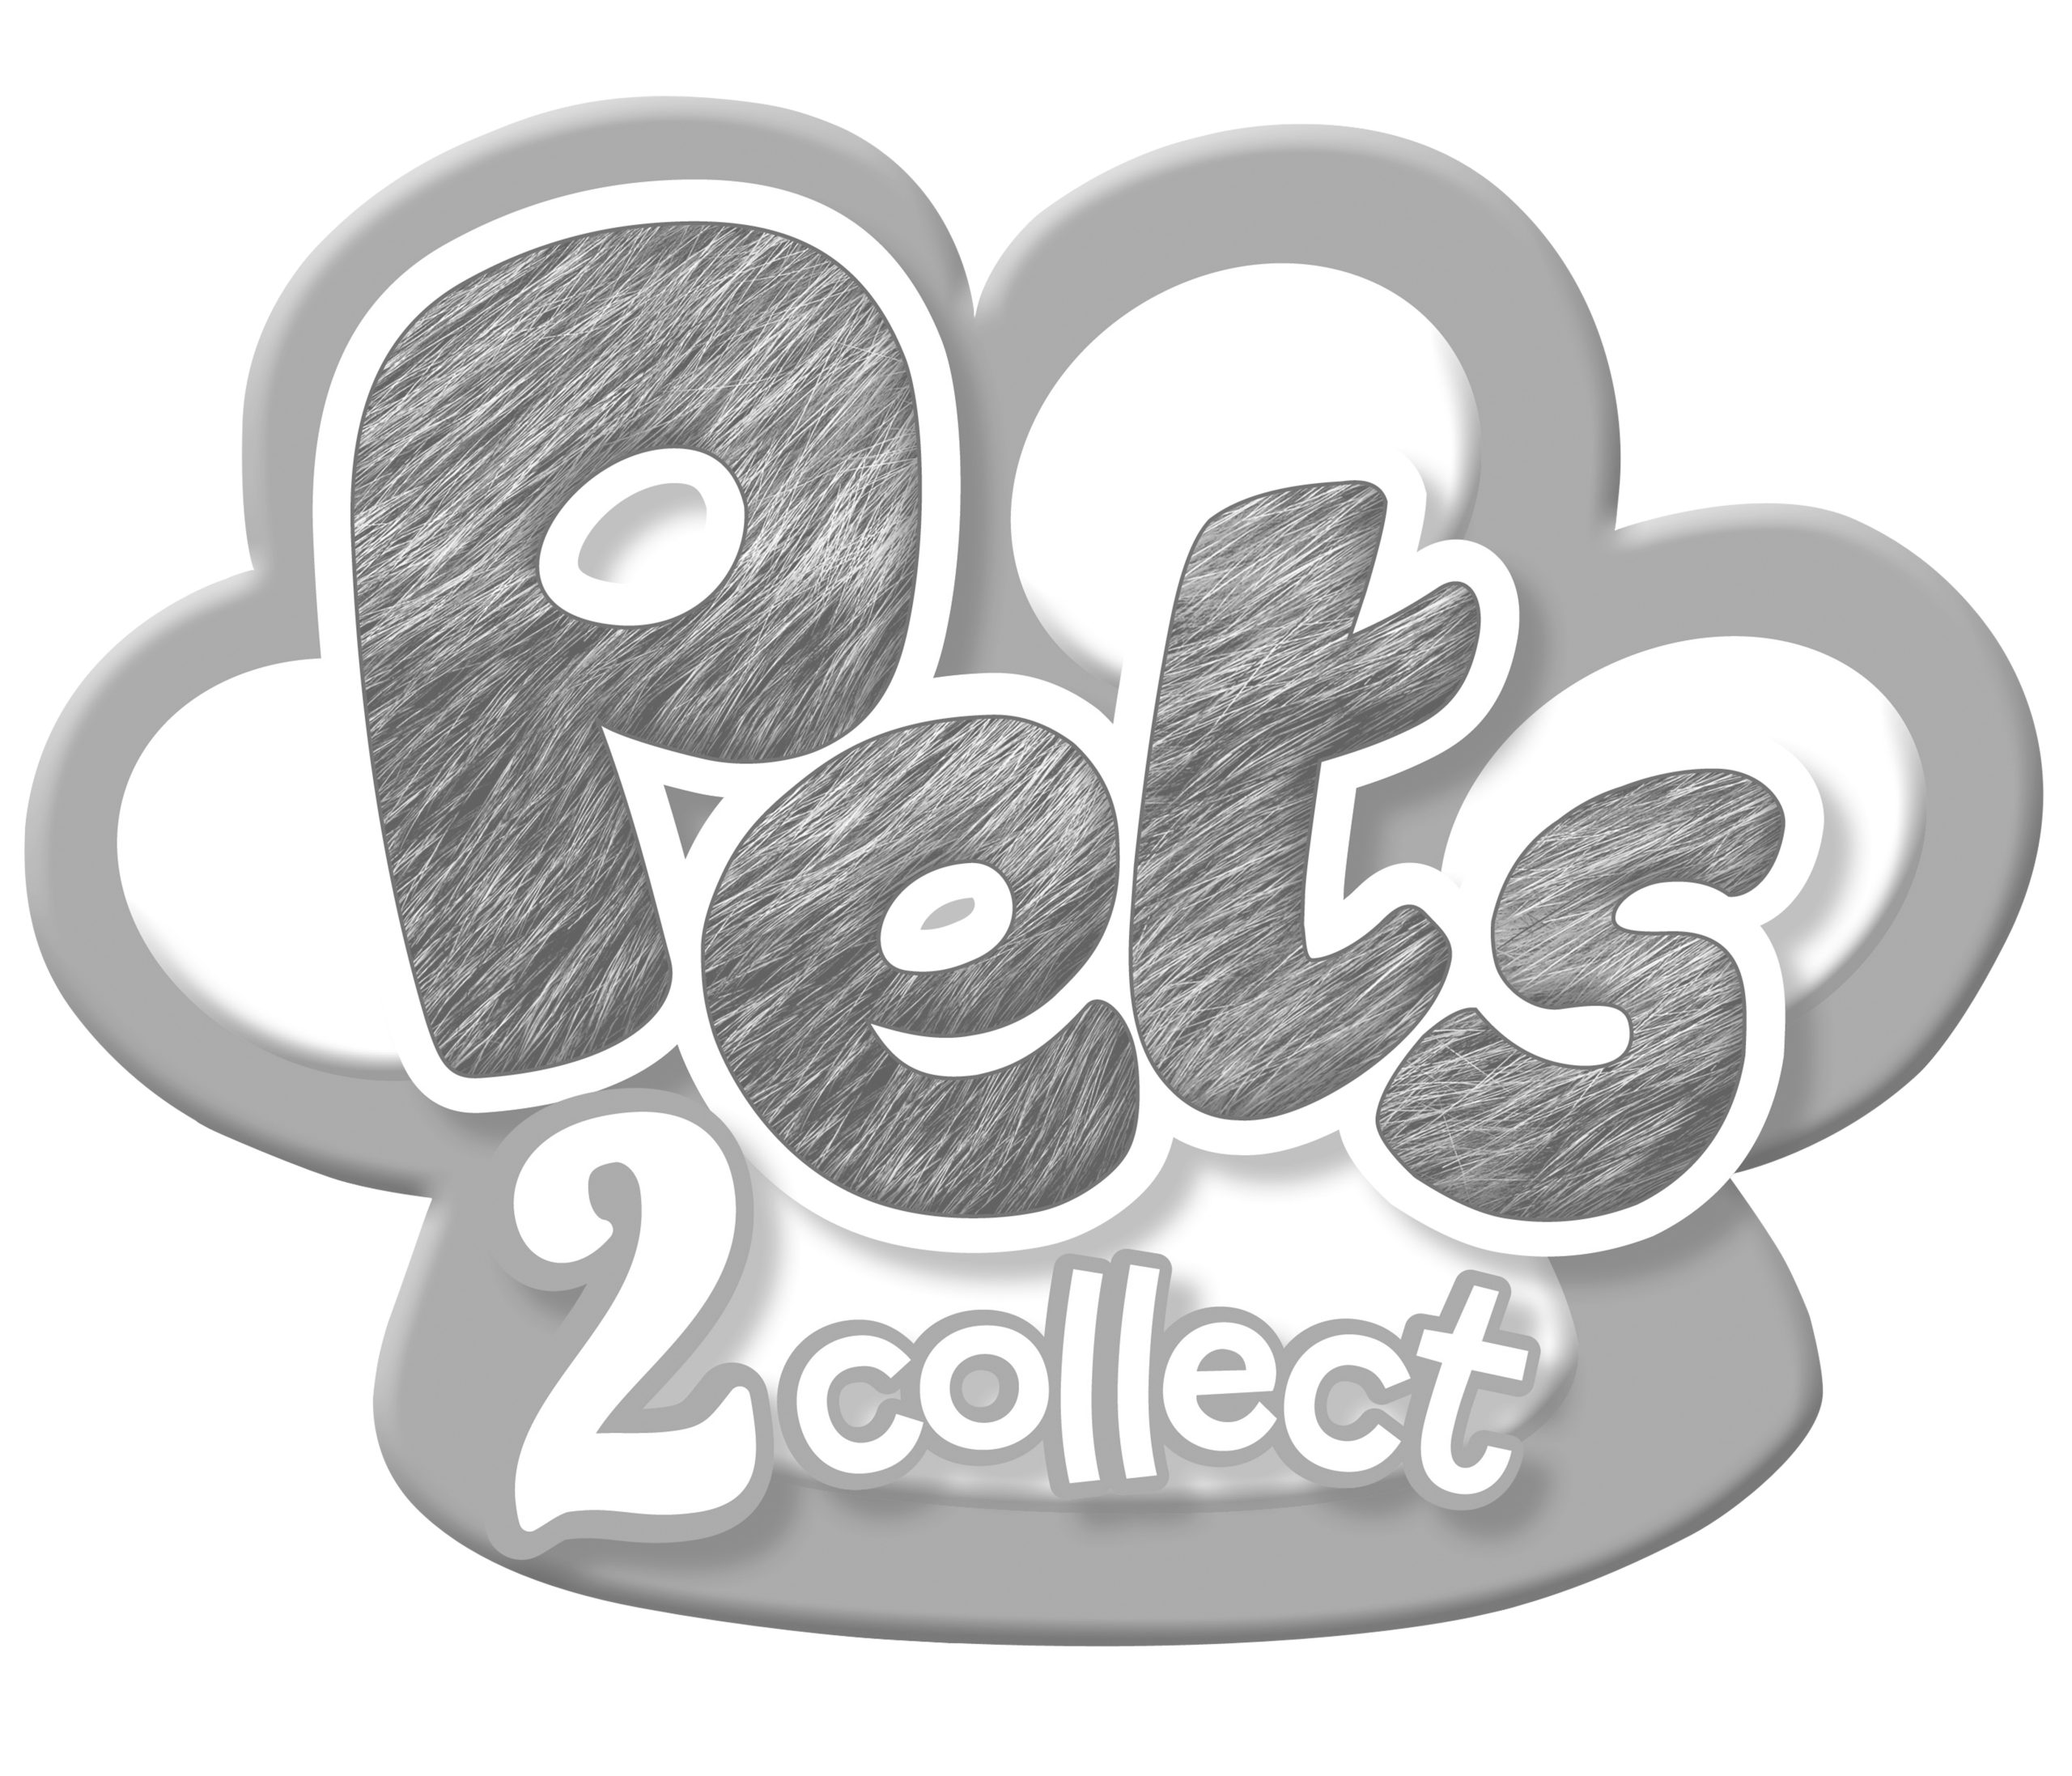 pets 2 collect